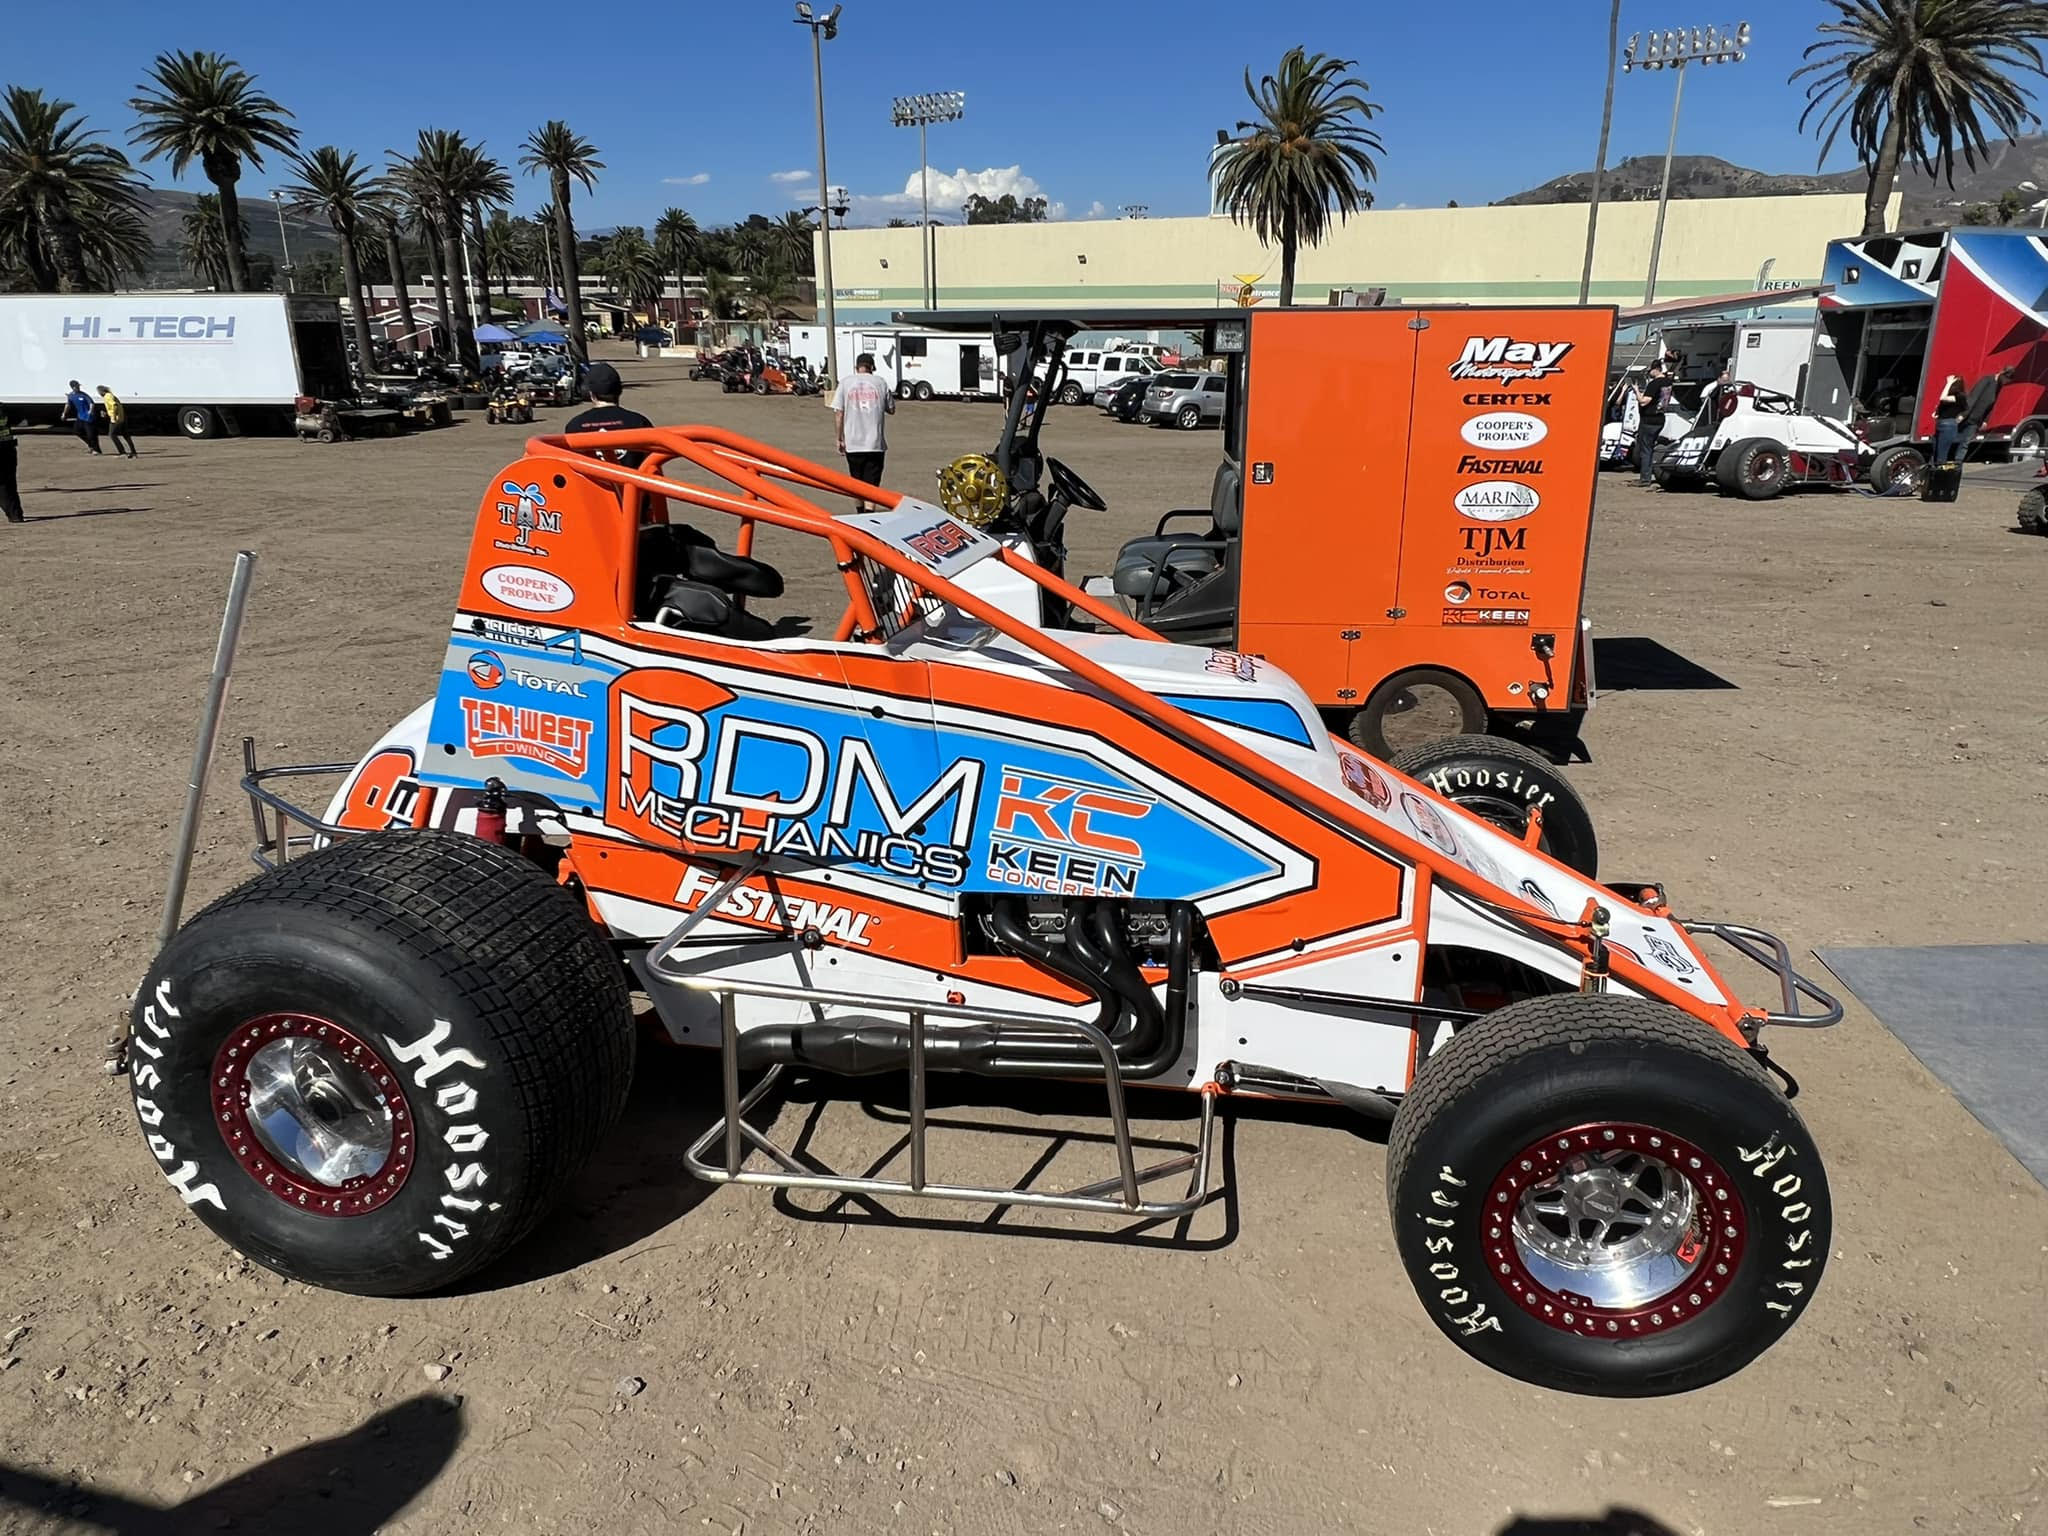 BRODY ROA COMPLETED HIS 2022 SEASON AT THE TURKEY NIGHT GRAND PRIX